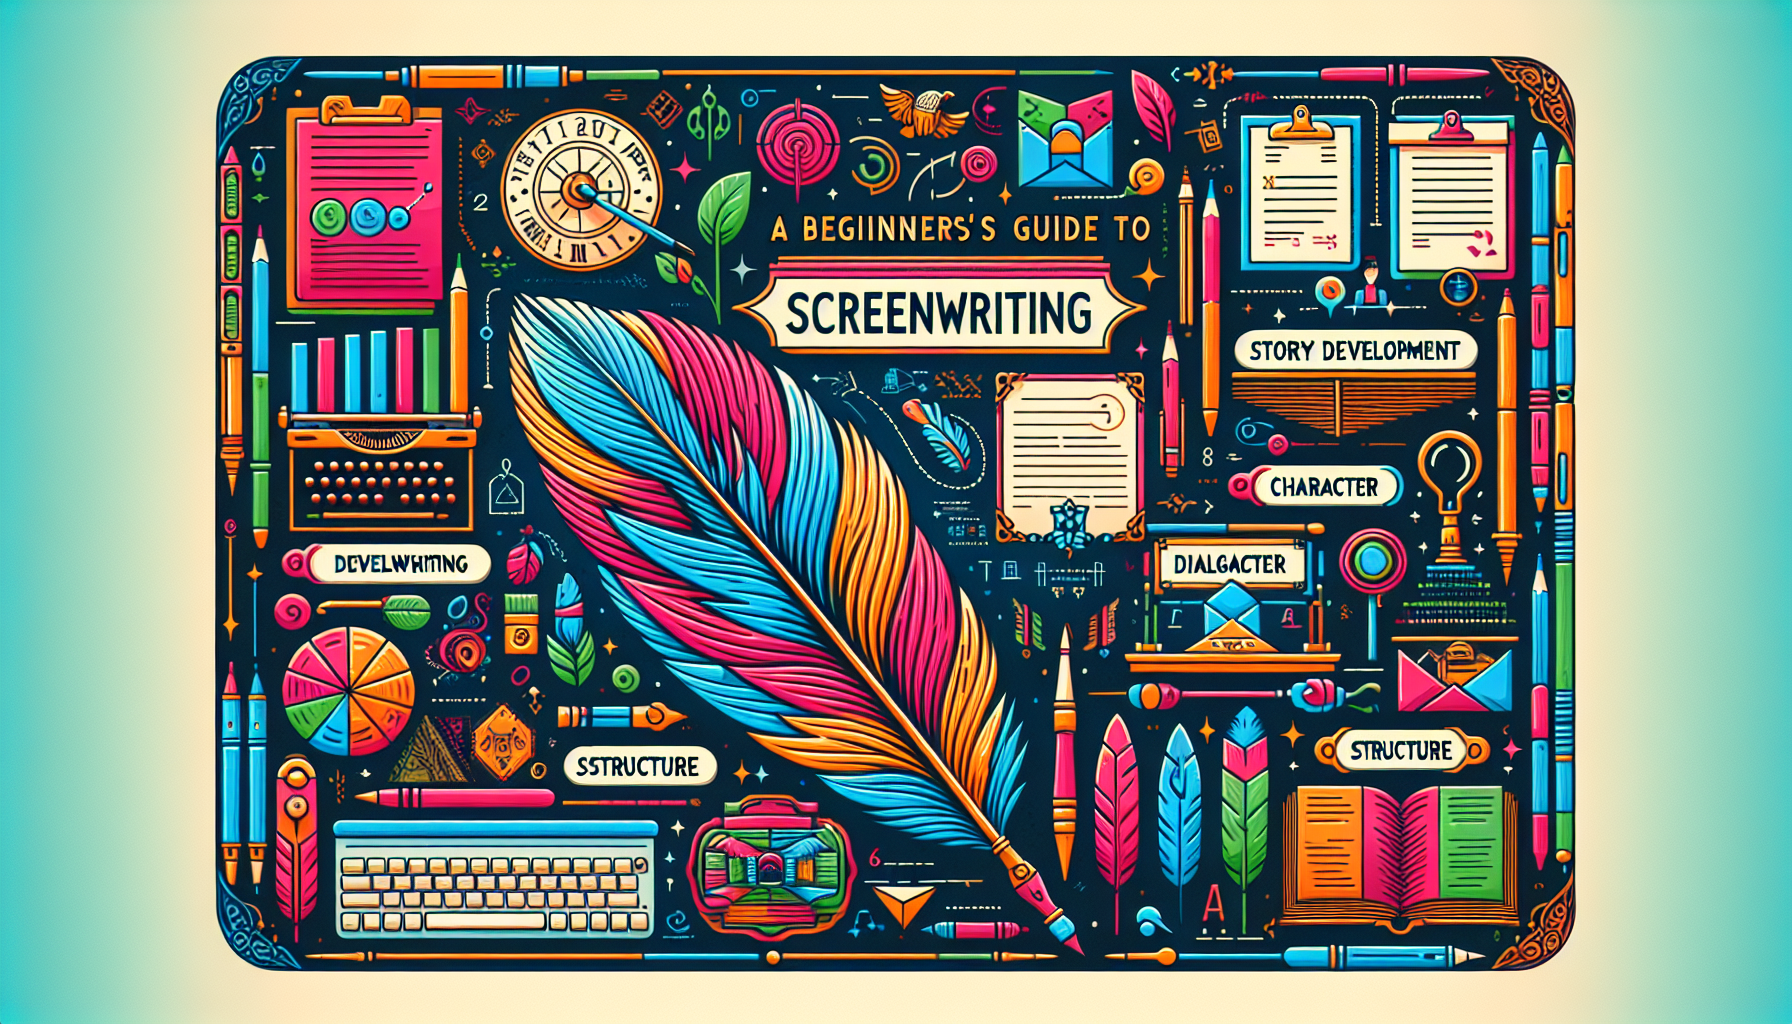 Visual representation of a beginner's guide to screenwriting. The guide should be colorful and incorporate modern aesthetics. The image includes several sections such as story development, character creation, dialogue writing, structure and formatting. These sections should be uniquely symbolized with appropriate graphics and images. There is a large, ornate feather quill pen in the center indicating the art of writing. The entire scene is complemented with a vibrant color palette imbuing a lively, creative atmosphere. However, there are no written words in the image.